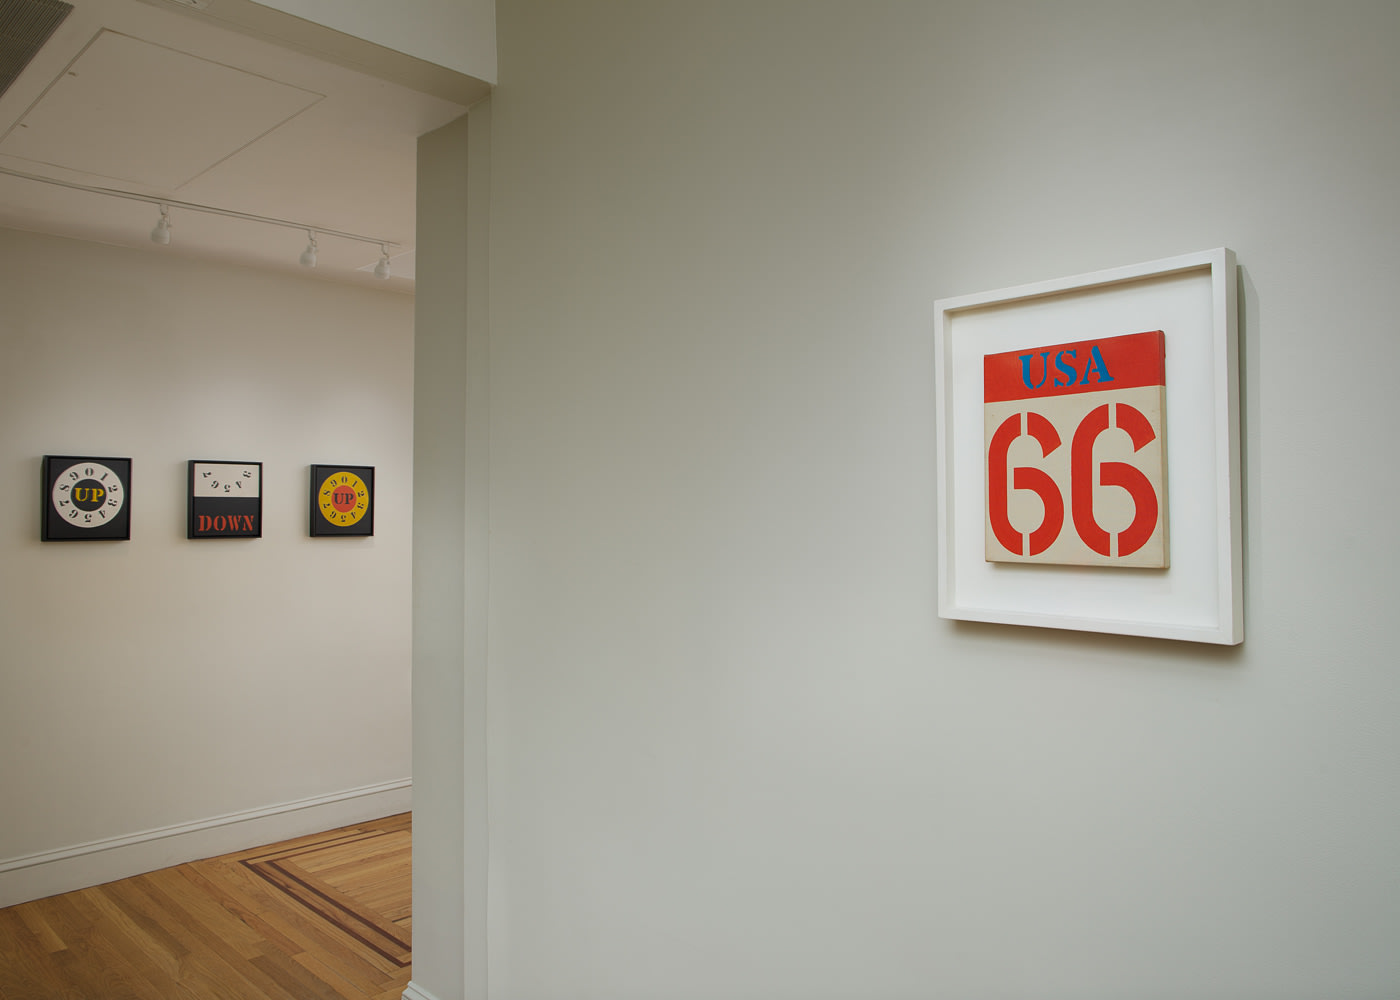 Installation view of Robert Indiana: Sign Paintings, 1960-65 at Craig F. Starr Gallery